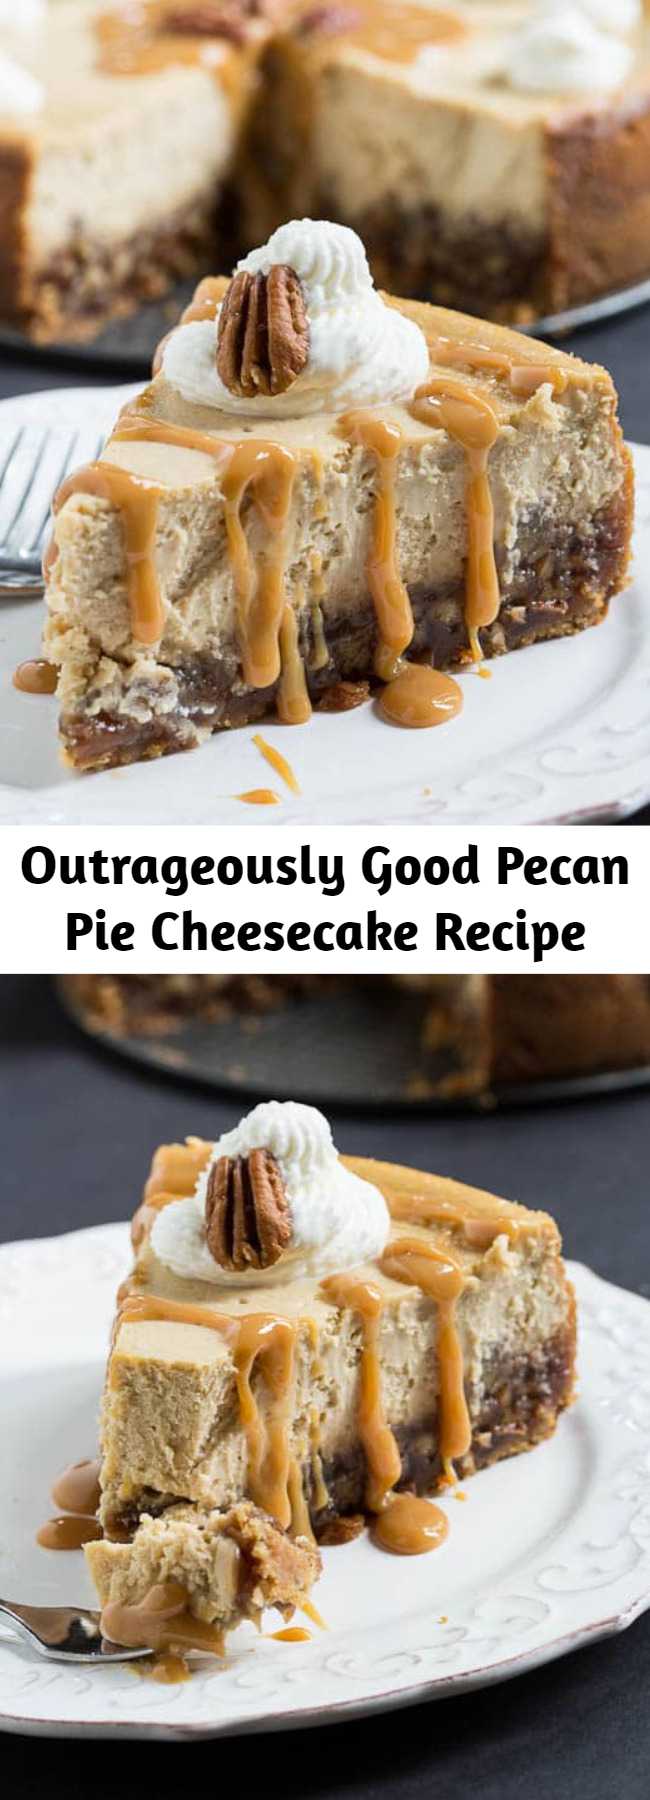 Outrageously Good Pecan Pie Cheesecake Recipe - Cheesecake and Pecan Pie together in one dessert. A truly decadent dessert with a layer of pecan pie in a vanilla wafer crust, topped by a creamy cheesecake. How could anything be better?